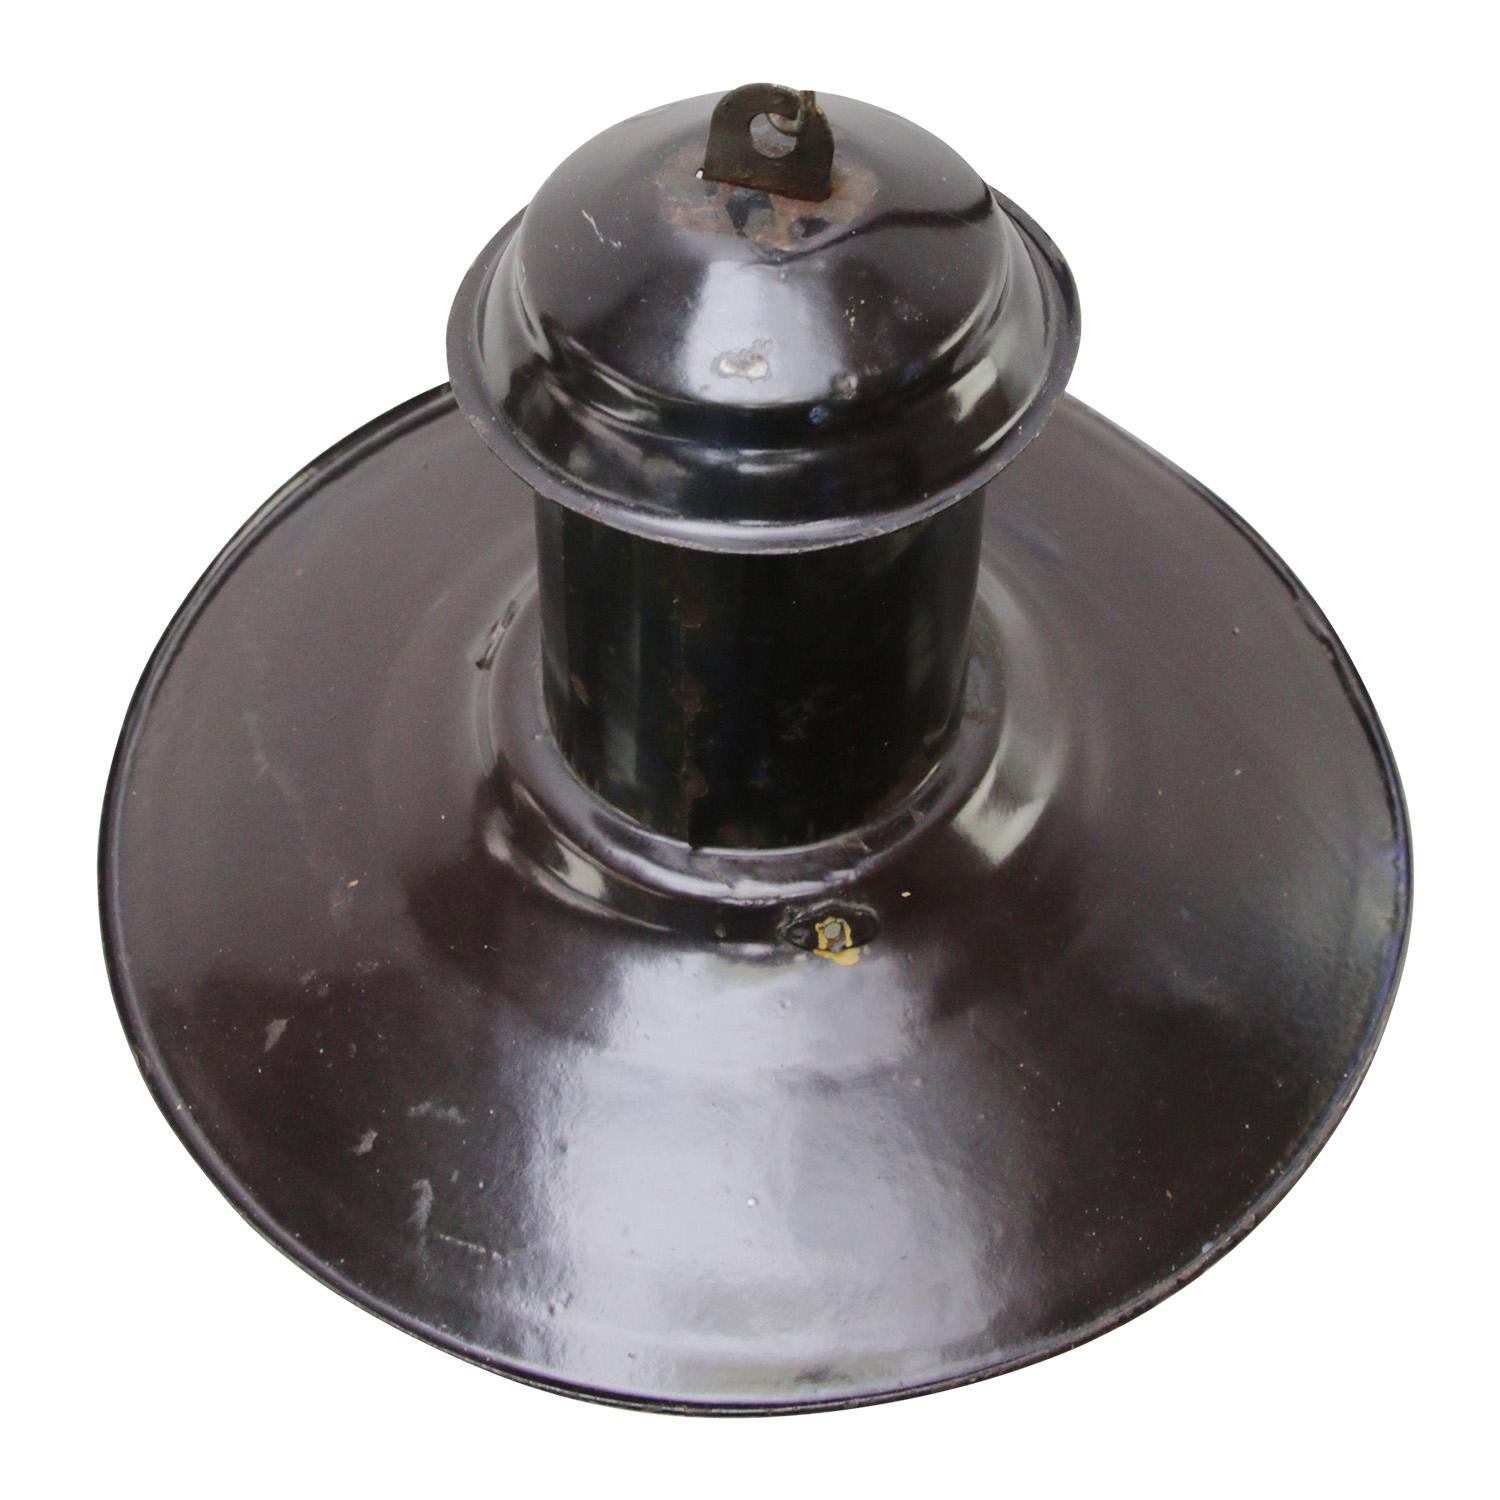 Brown enamel factory pendant
White inside. White opaline glass

Measures: diameter glass 15 cm.

Weight : 1.60 kg / 3.5 lb

Priced per individual item. All lamps have been made suitable by international standards for incandescent light bulbs,